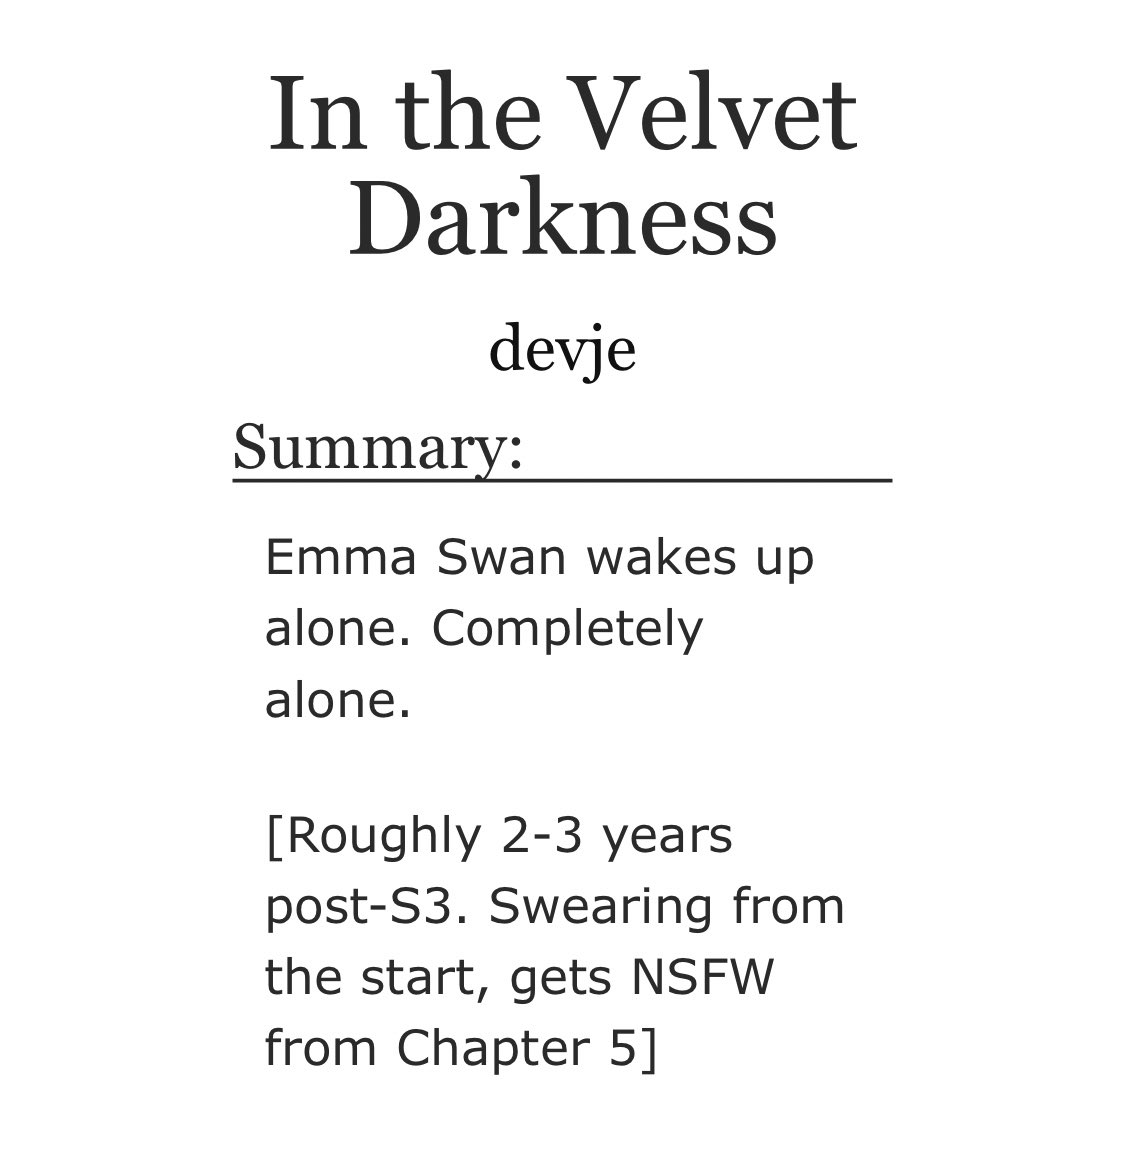 January 24: In the Velvet Darkness by devje  https://archiveofourown.org/works/1663199/chapters/3529082